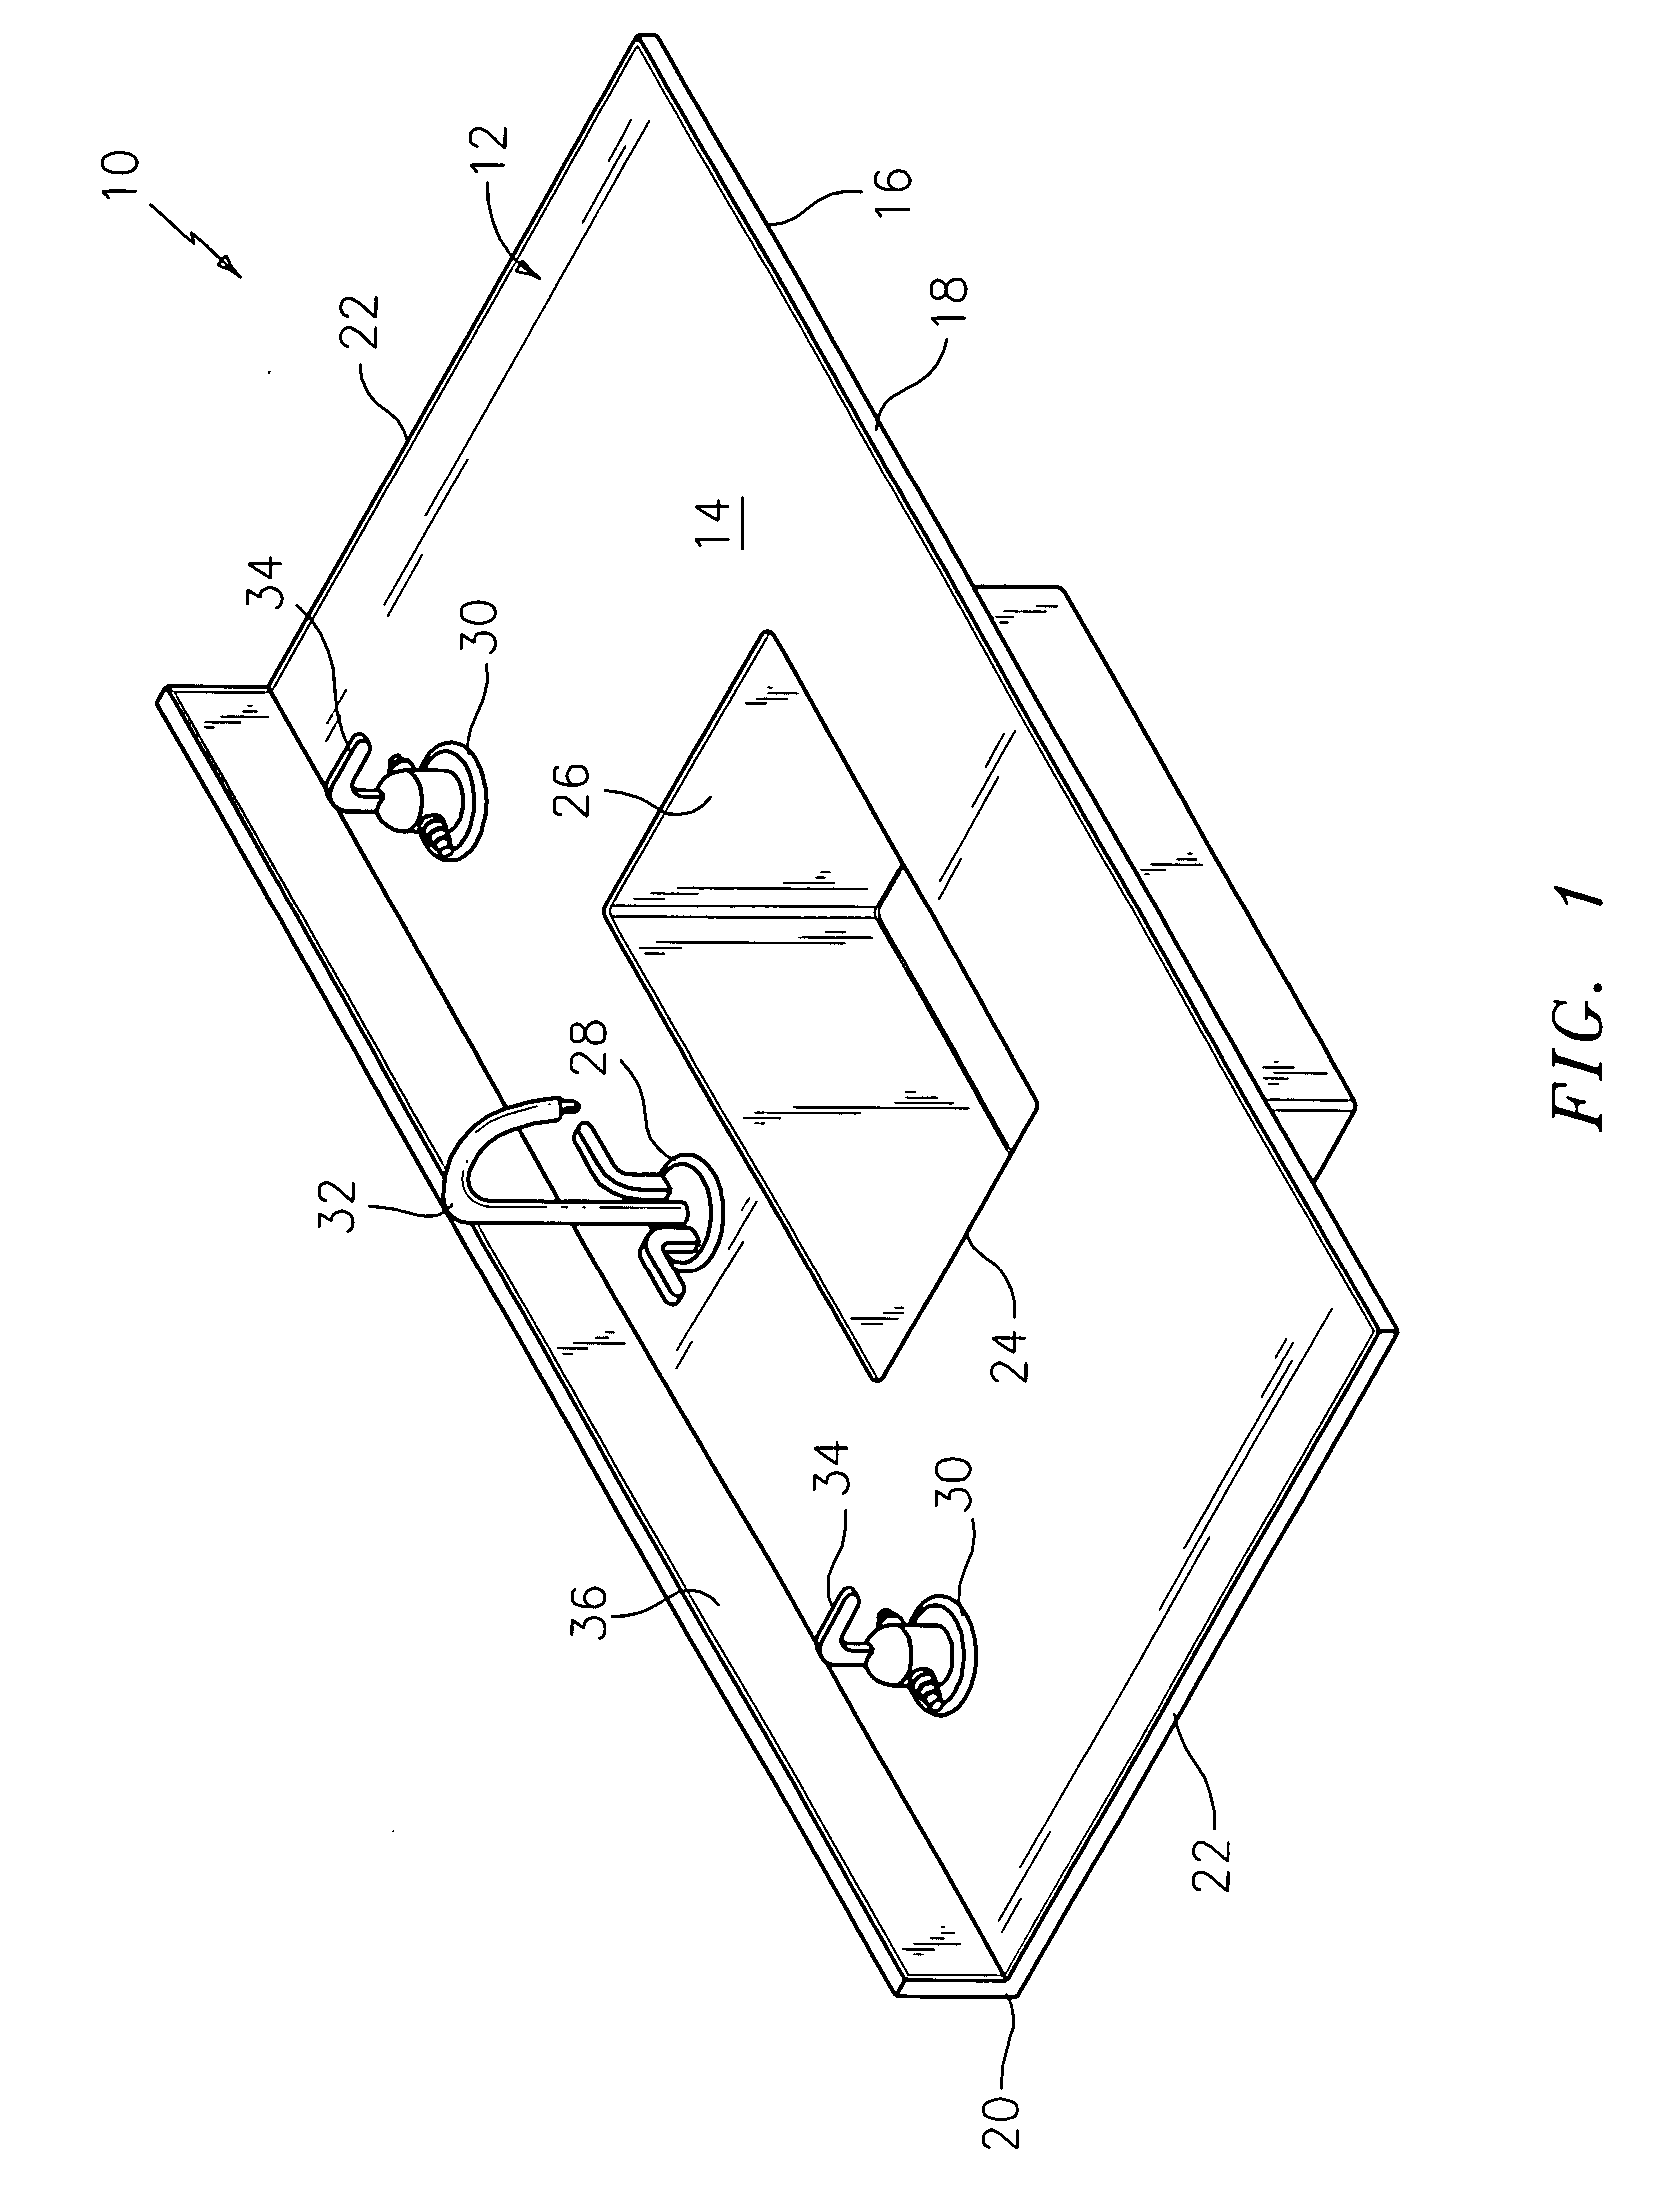 Panel Having a Chemical Resistant Work Surface